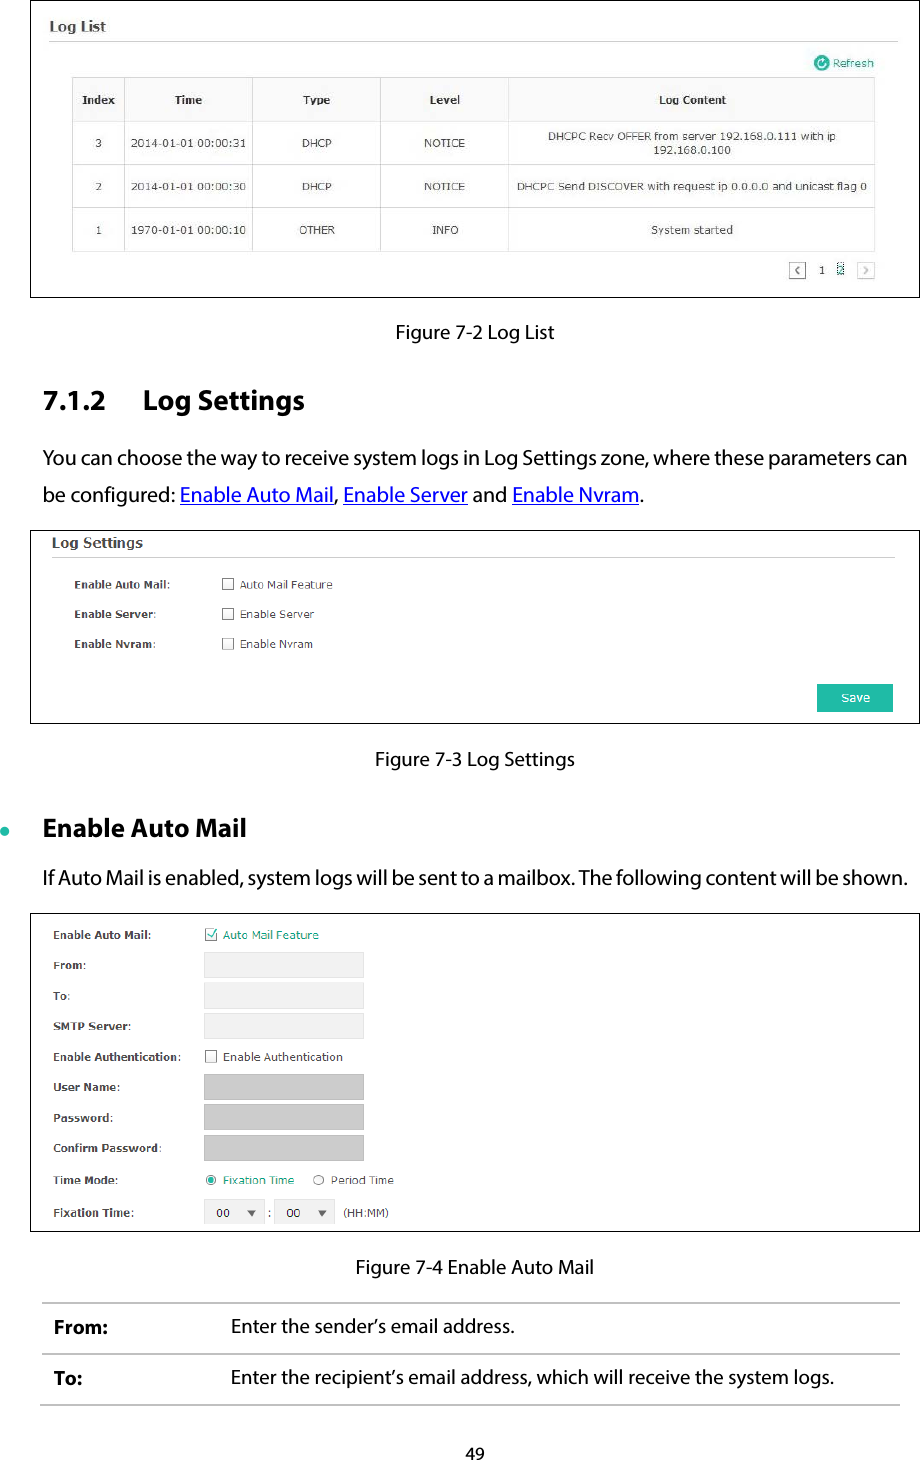 49   Figure 7-2 Log List 7.1.2 Log Settings You can choose the way to receive system logs in Log Settings zone, where these parameters can be configured: Enable Auto Mail, Enable Server and Enable Nvram.  Figure 7-3 Log Settings  Enable Auto Mail If Auto Mail is enabled, system logs will be sent to a mailbox. The following content will be shown.  Figure 7-4 Enable Auto Mail From:  Enter the sender’s email address. To:  Enter the recipient’s email address, which will receive the system logs. 